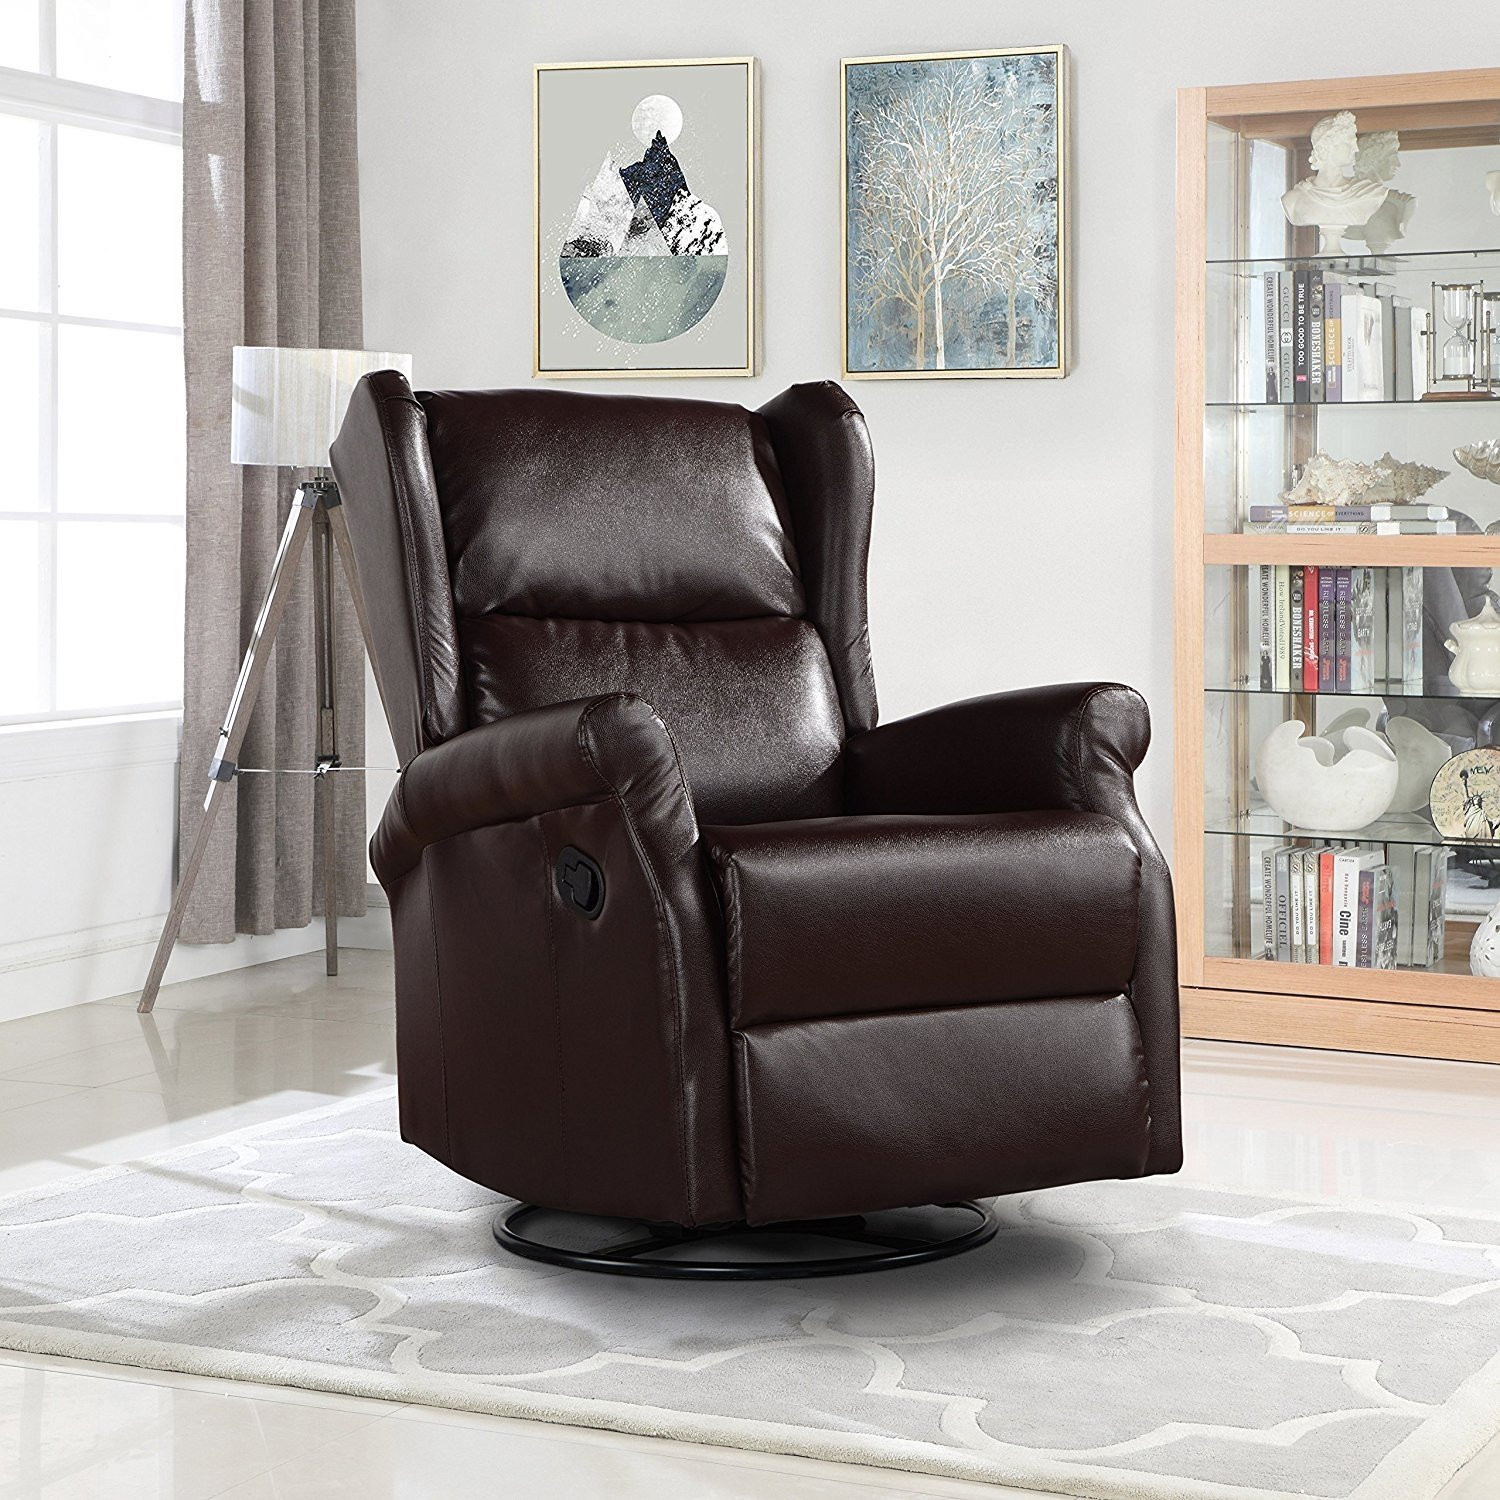 Swivel Living Room Chair
 Reclining Swivel Accent Chair for Living Room Faux